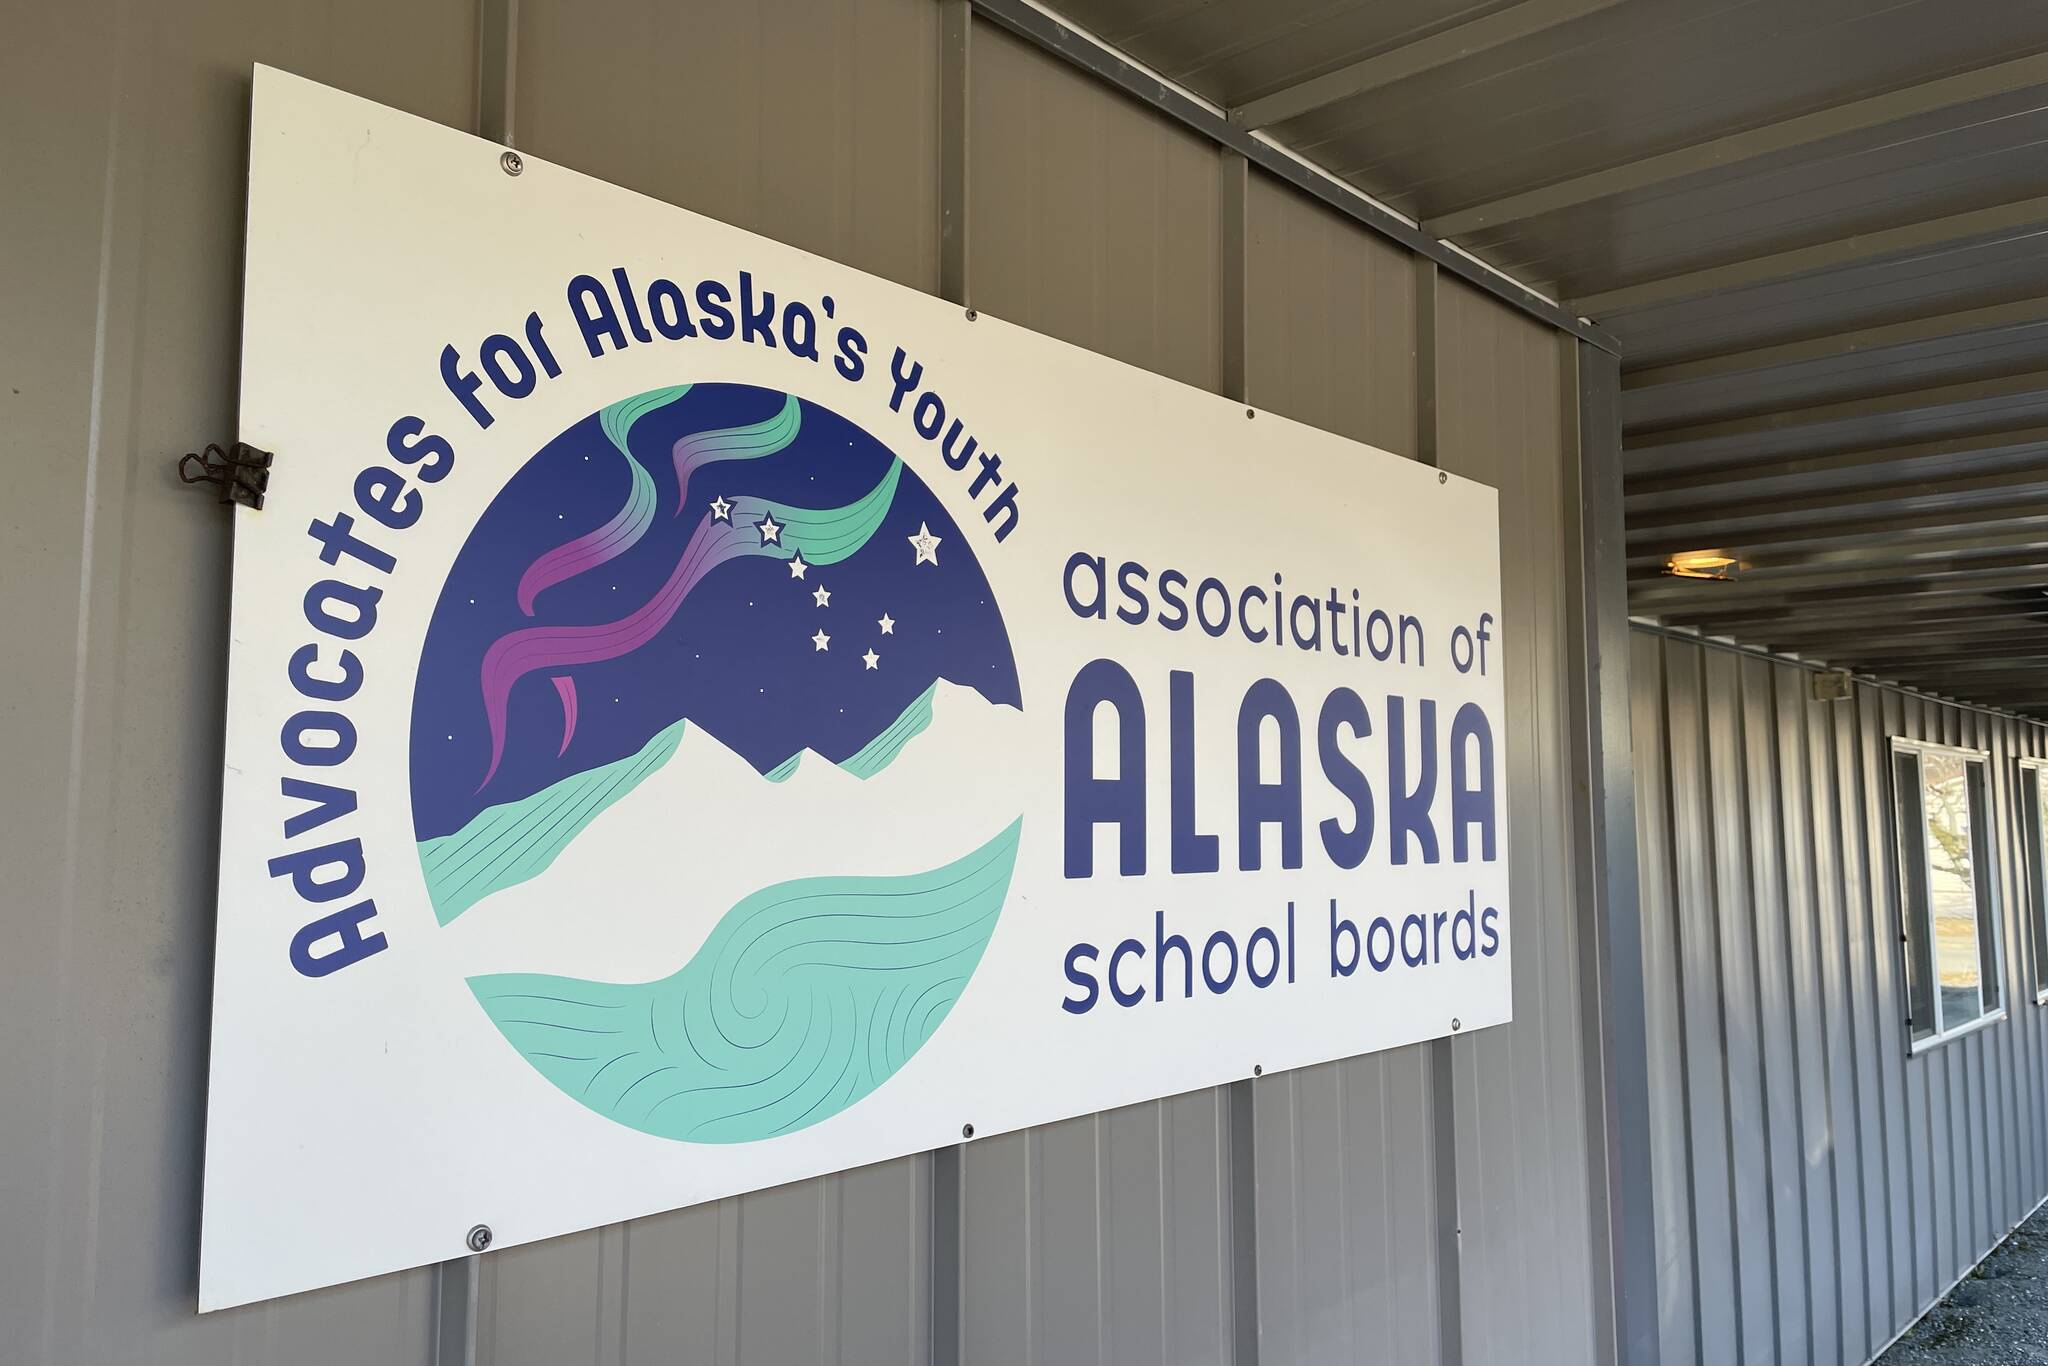 The Association of Alaska School Boards won a $100,000 grant to develop resources to more closely involve families in the education process from the Carnegie Corporation on Tuesday. (Michael S. Lockett / Juneau Empire)